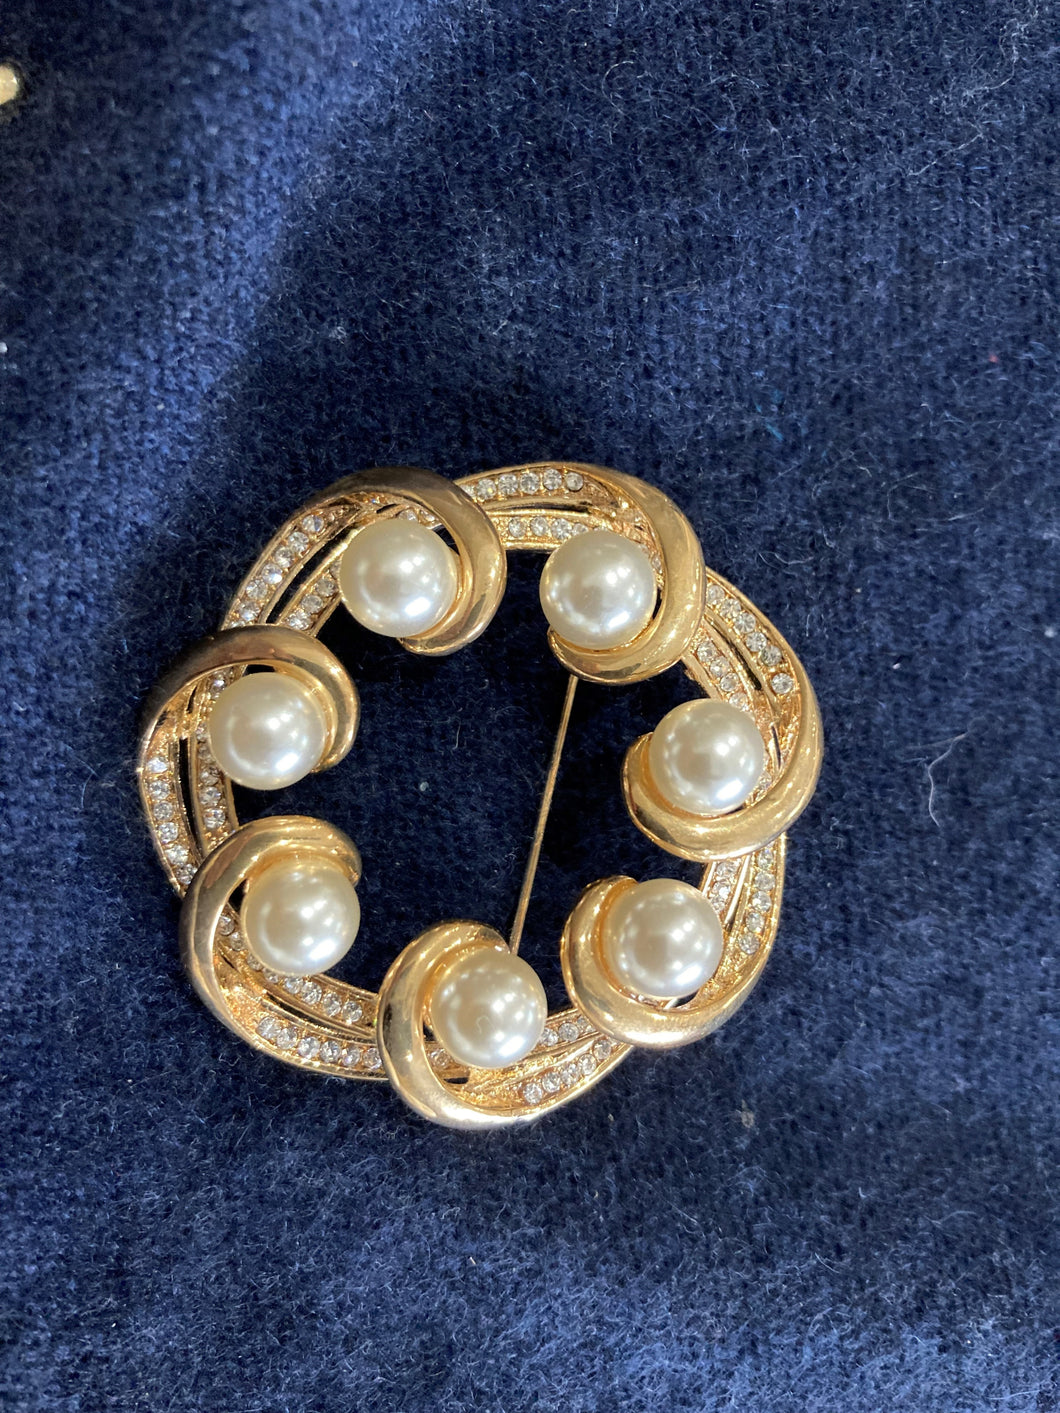 The classic Brooch